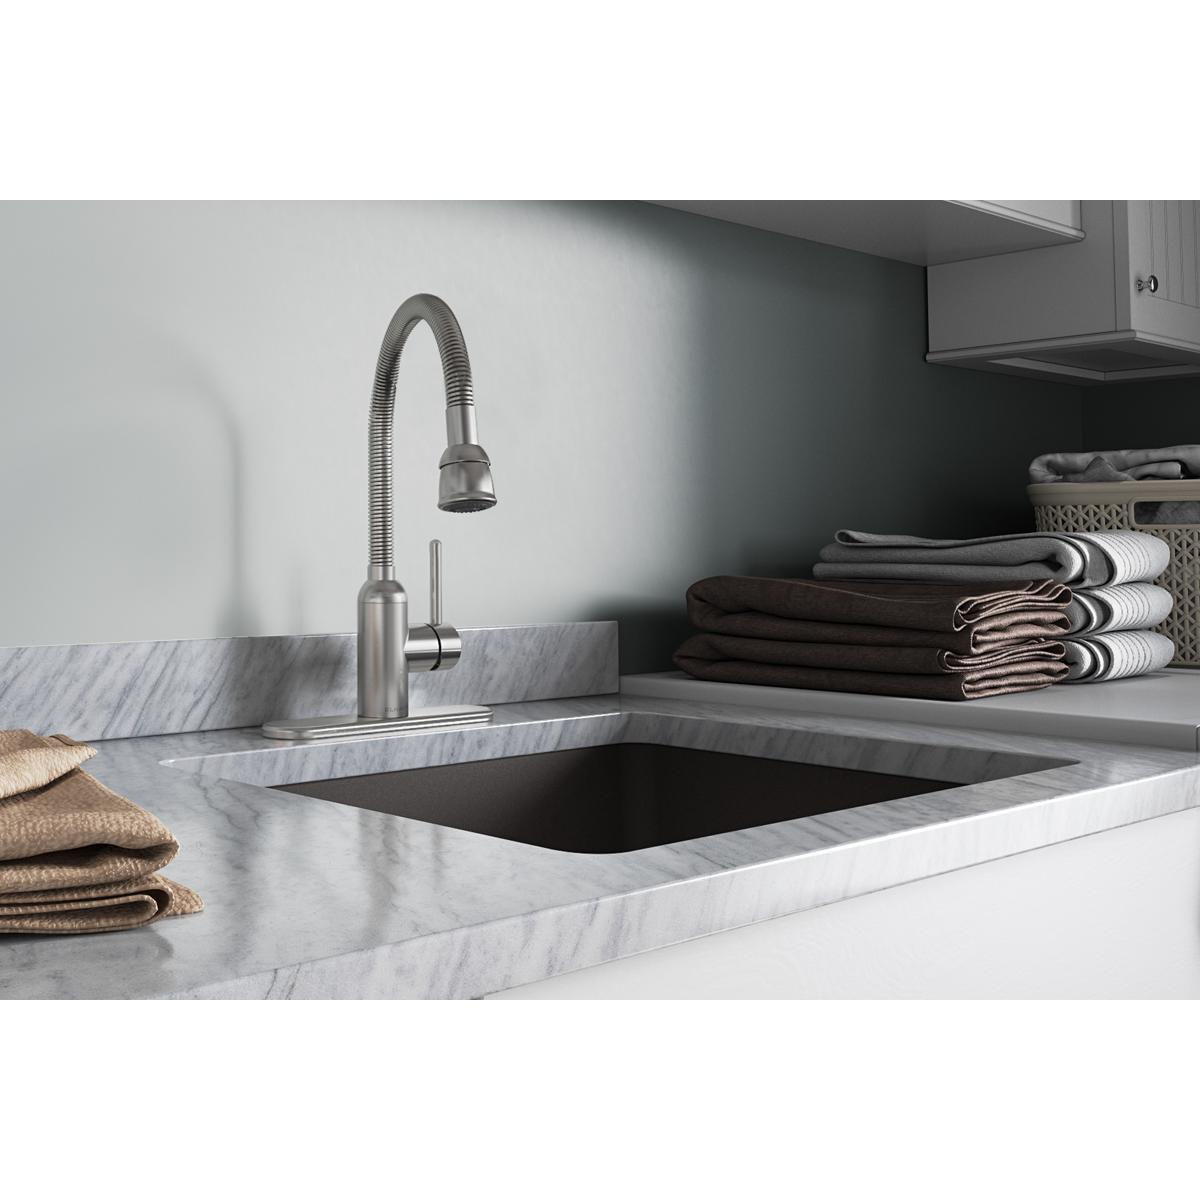 Elkay Pursuit Laundry/Utility Faucet with Flexible Spout Forward Only Lever Handle in Lustrous Steel